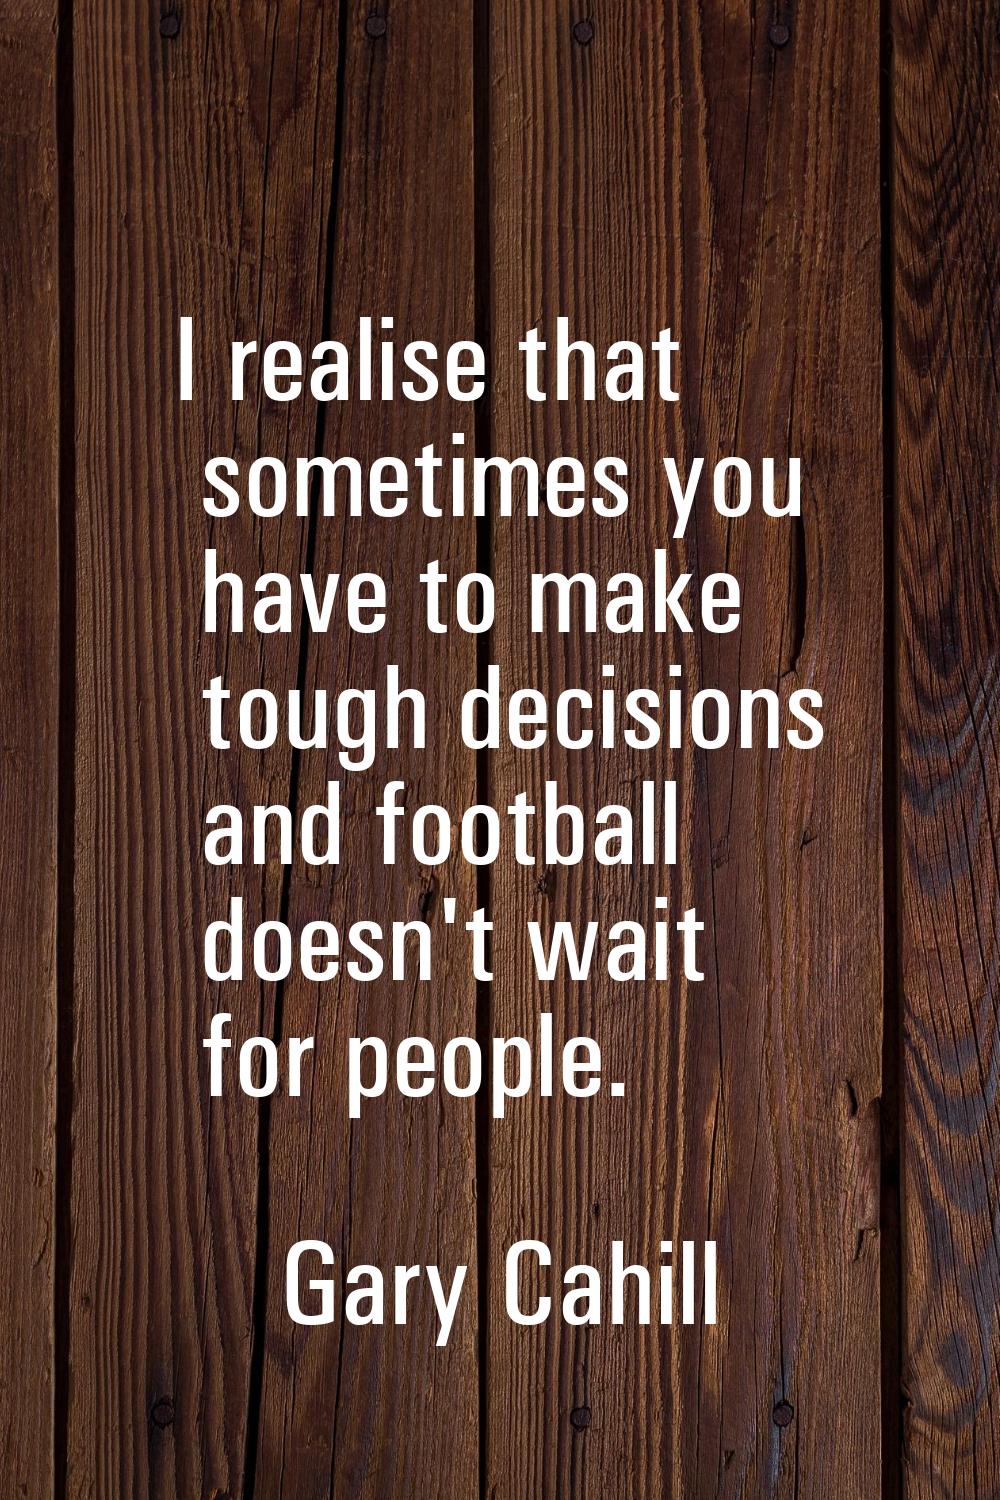 I realise that sometimes you have to make tough decisions and football doesn't wait for people.